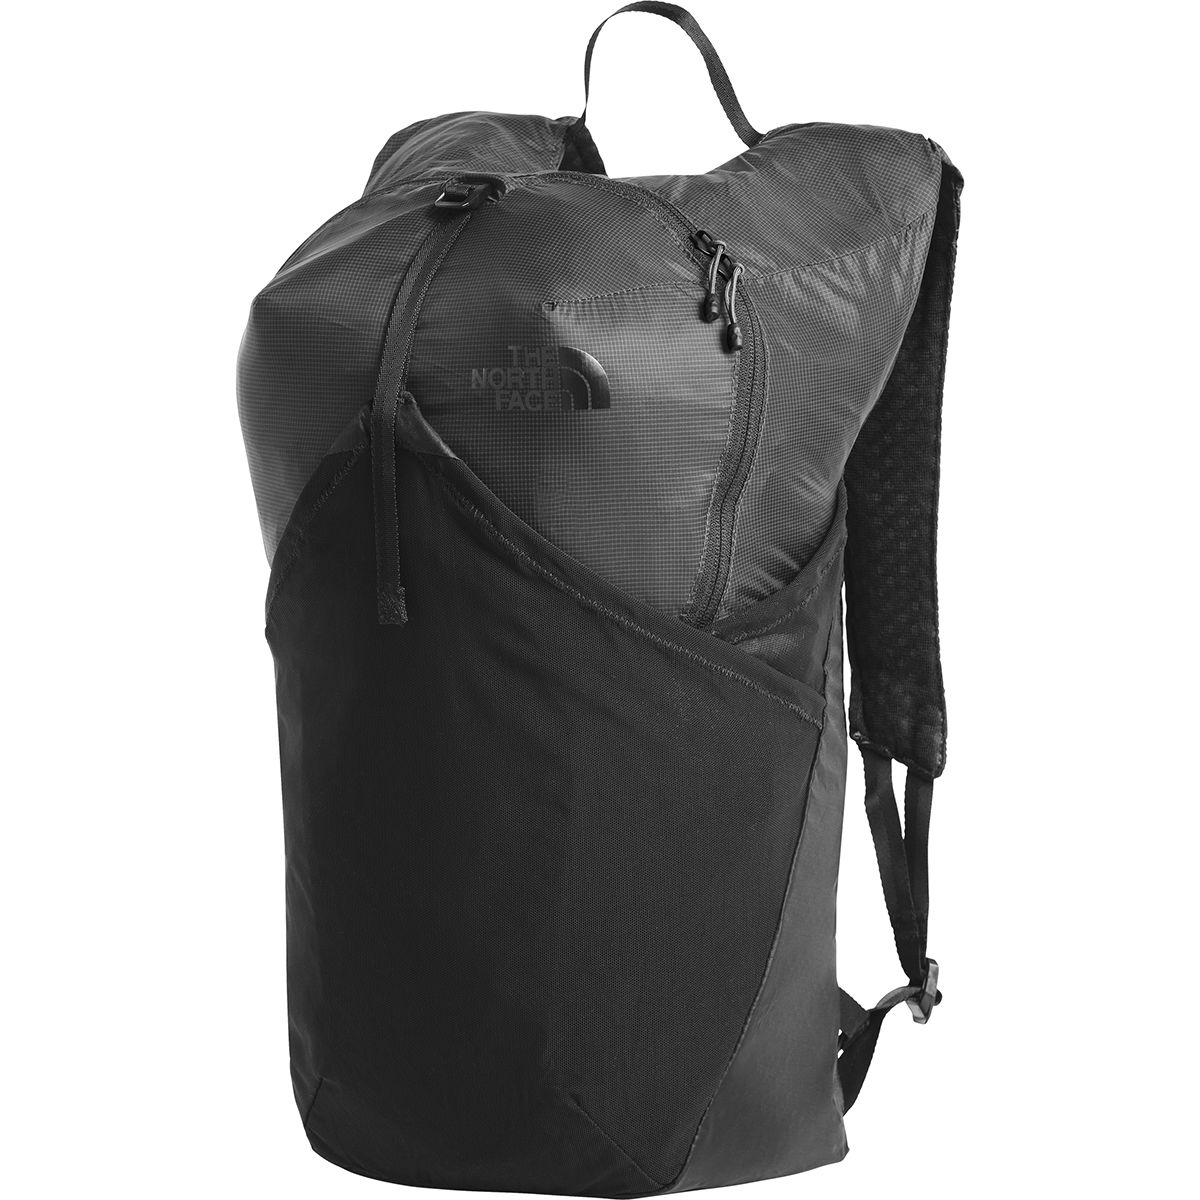 north face packable duffel